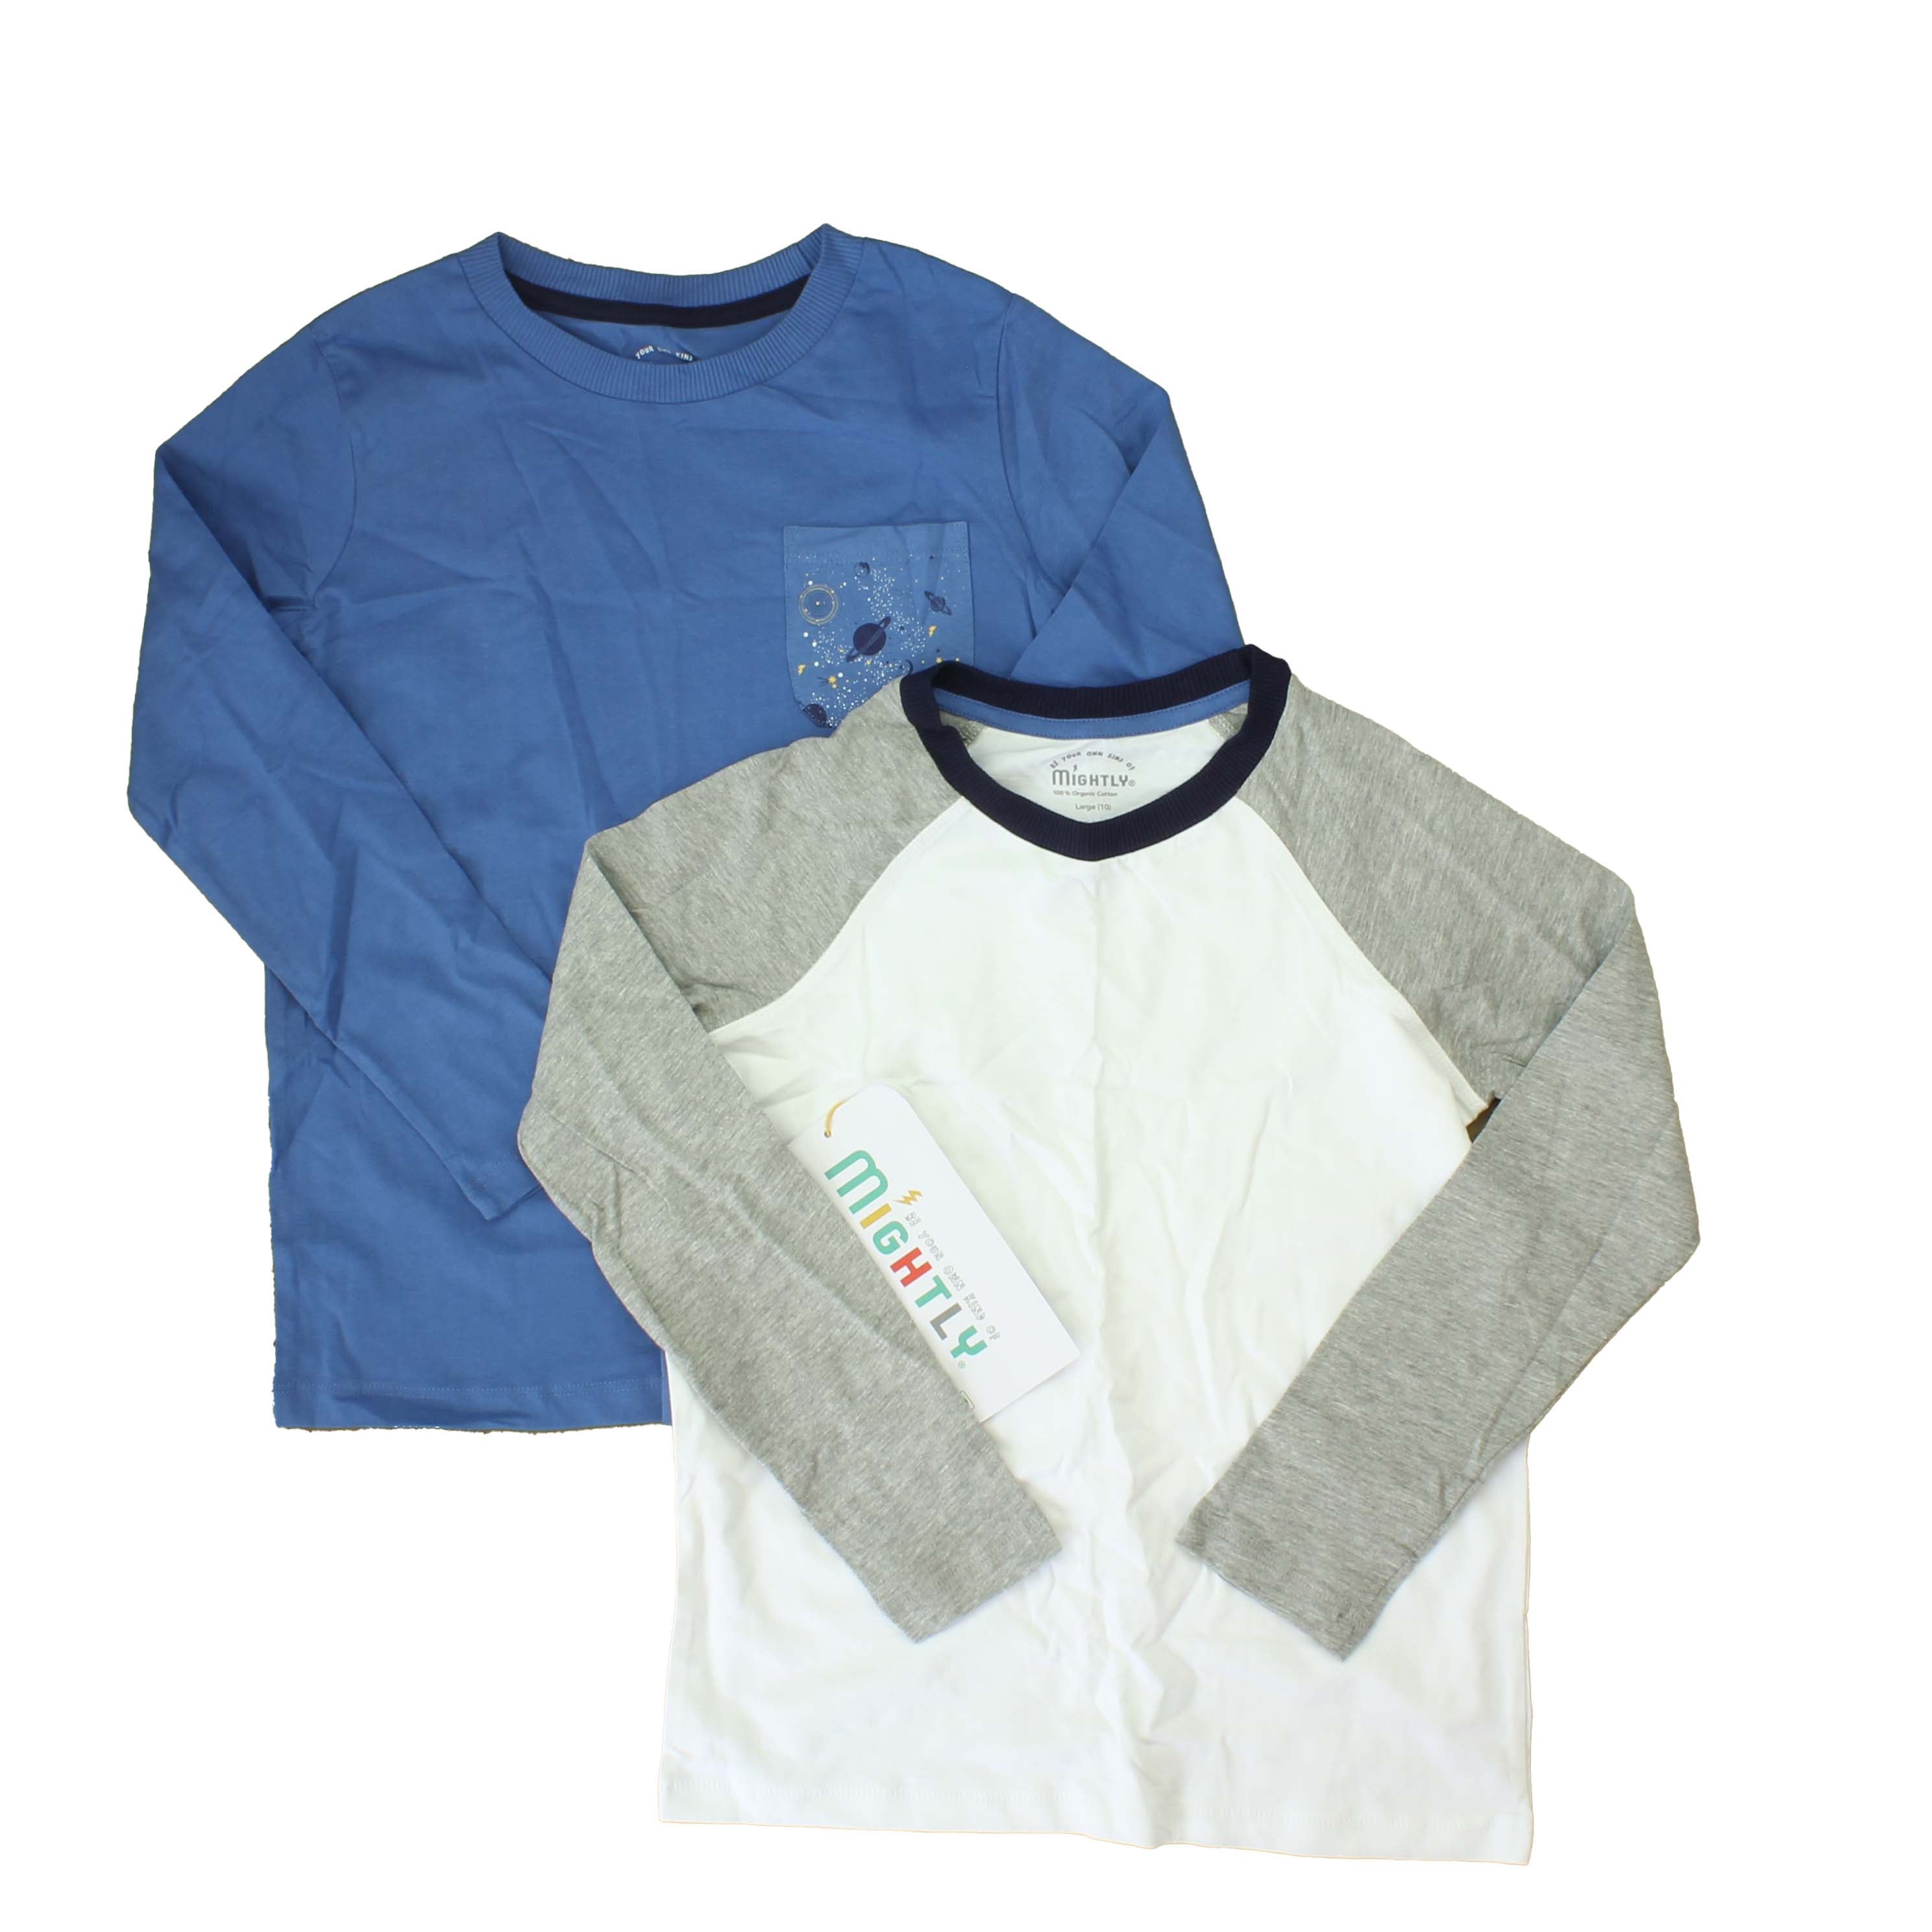 Pre-owned Blue | White | Grey T-Shirt size: Big Kid